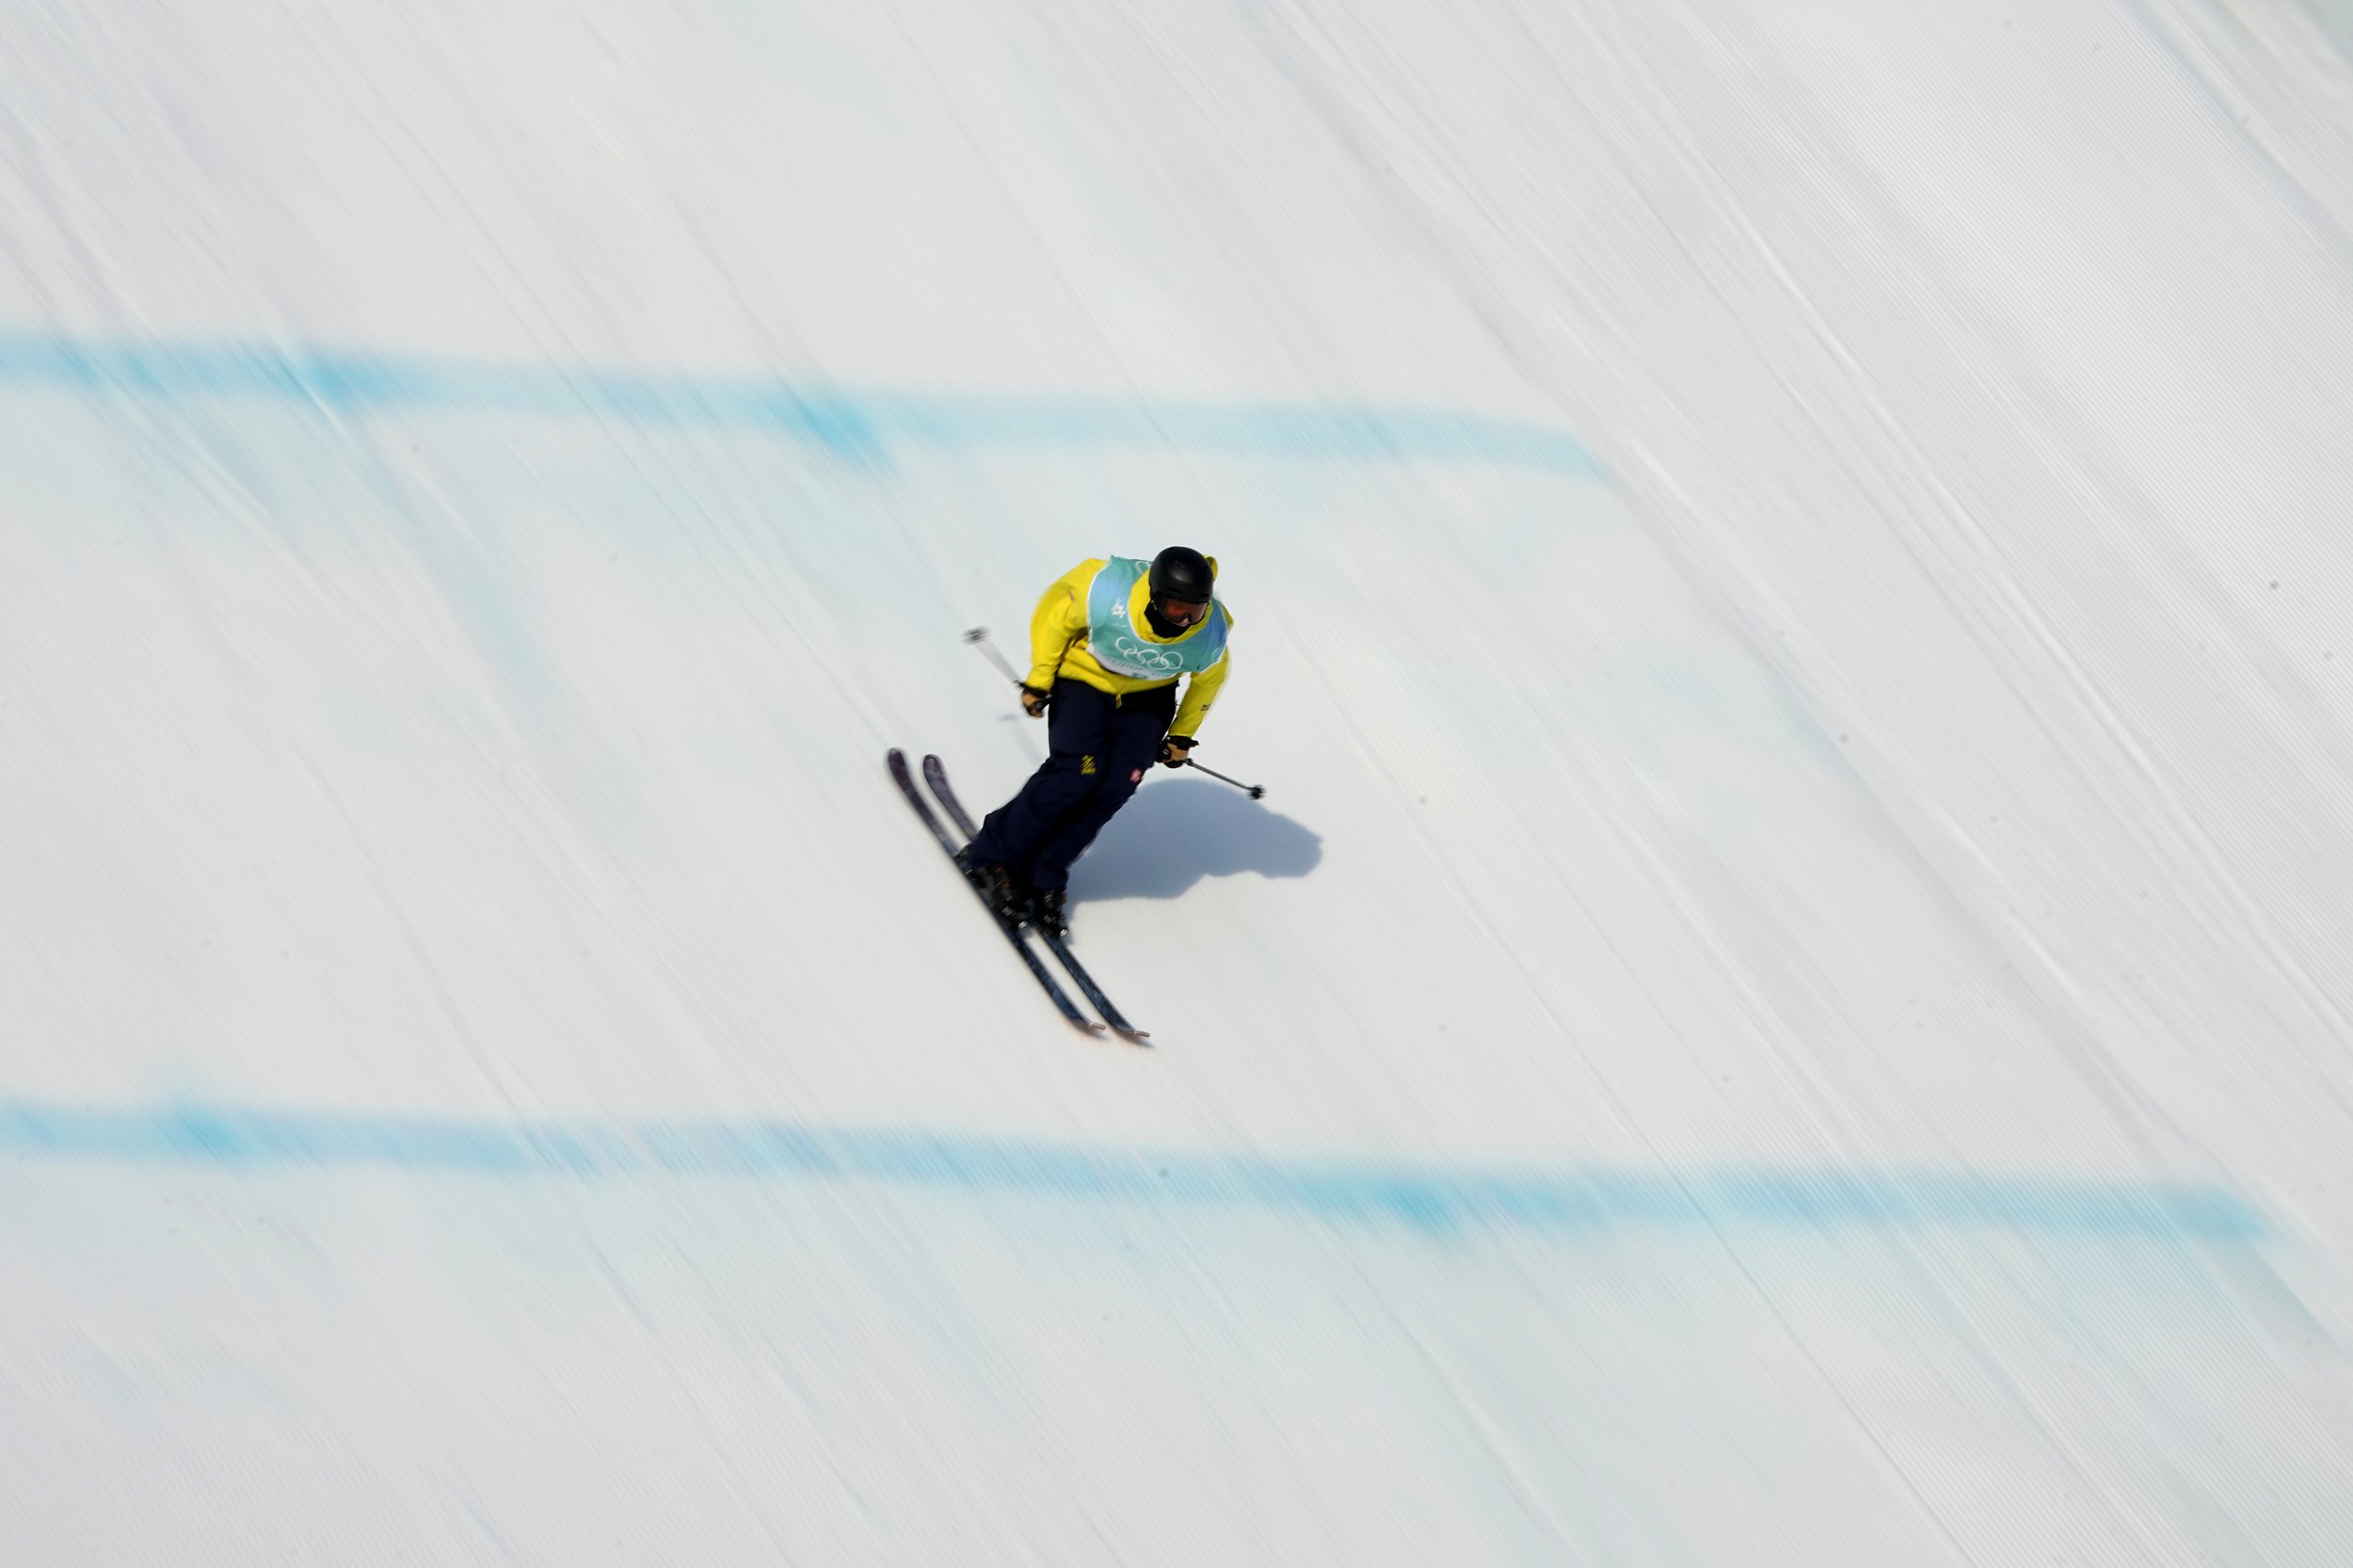  Oliwer Magnusson of Sweden trains ahead of the men's freestyle skiing big air finals of the 2022 Winter Olympics, Wednesday, Feb. 9, 2022, in Beijing. (AP Photo/Jae C. Hong) 